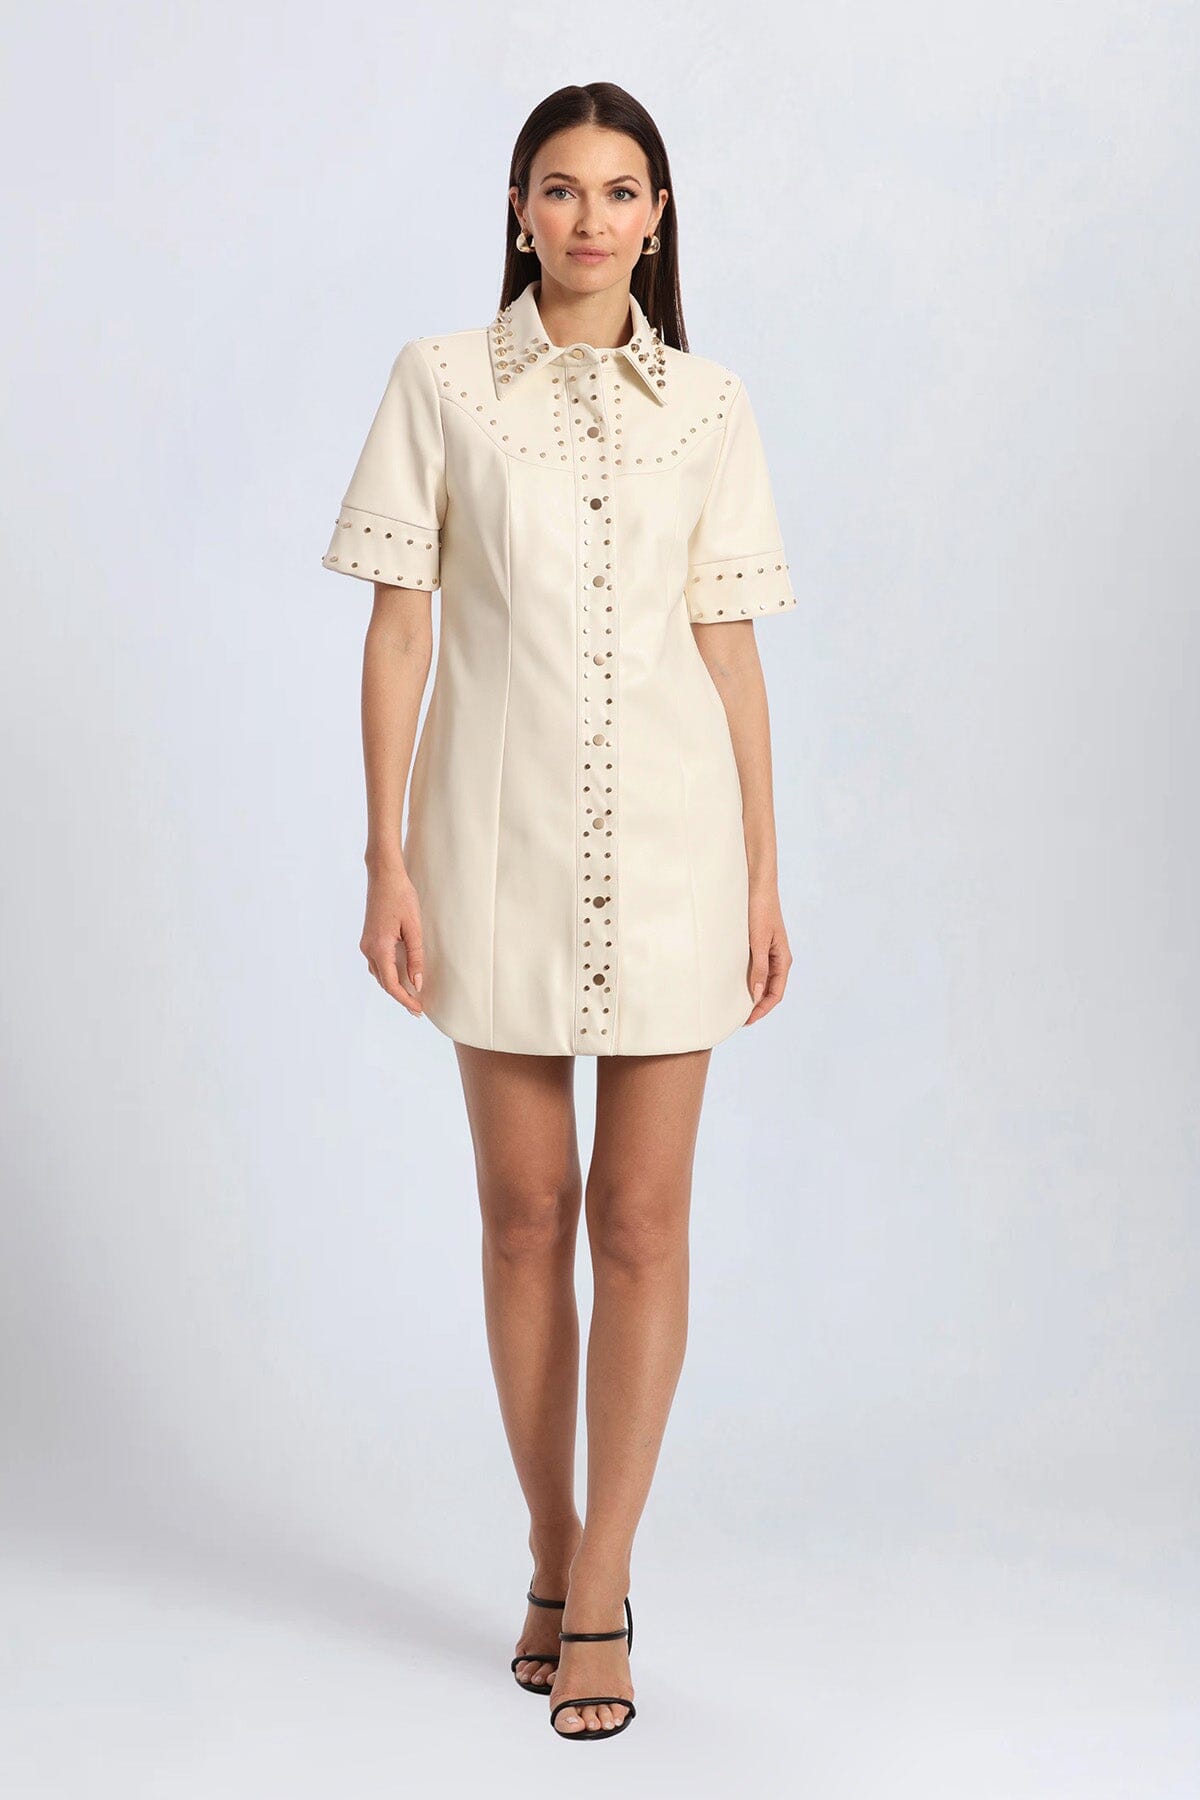 White Faux Leather Short Sleeve Mini Shirtdress with Studs - Cute White Dress by Avec Les Filles